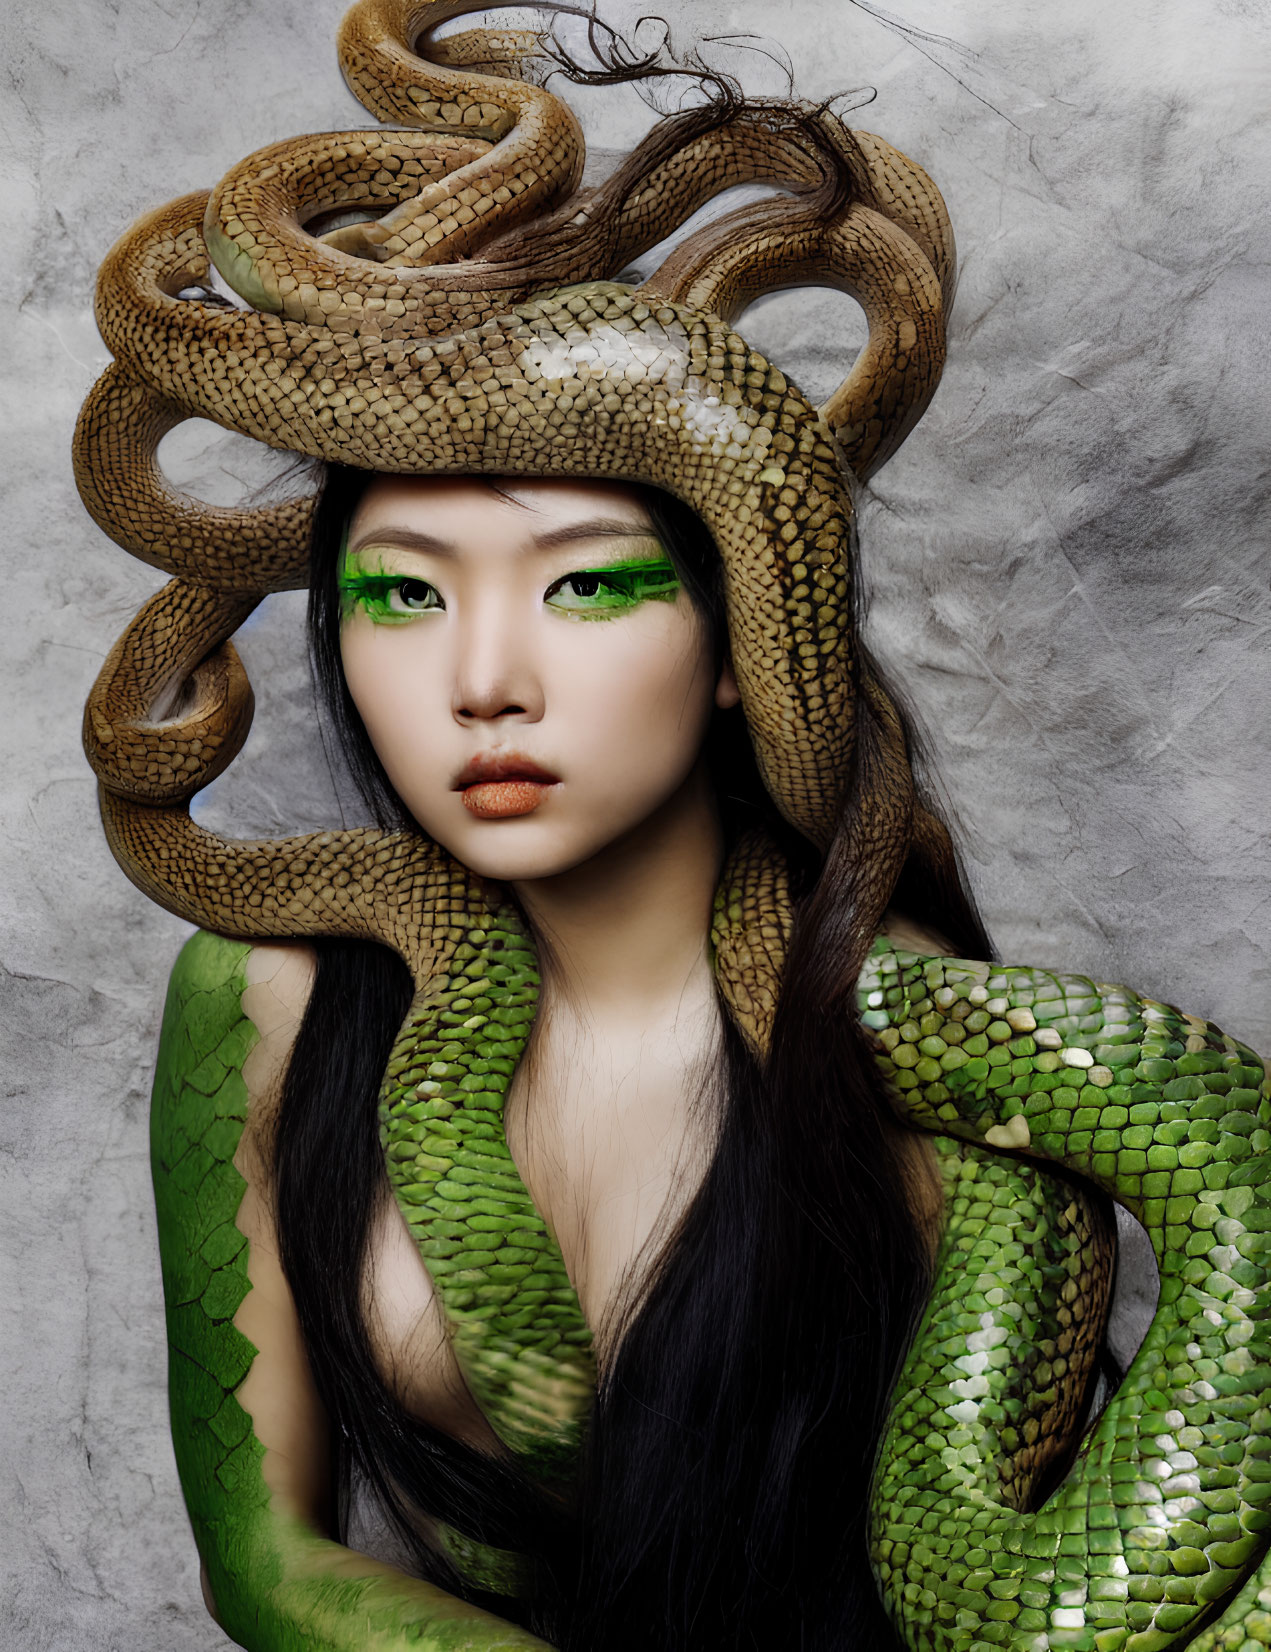 Person with snake hair & green makeup wrapped in snake on textured background